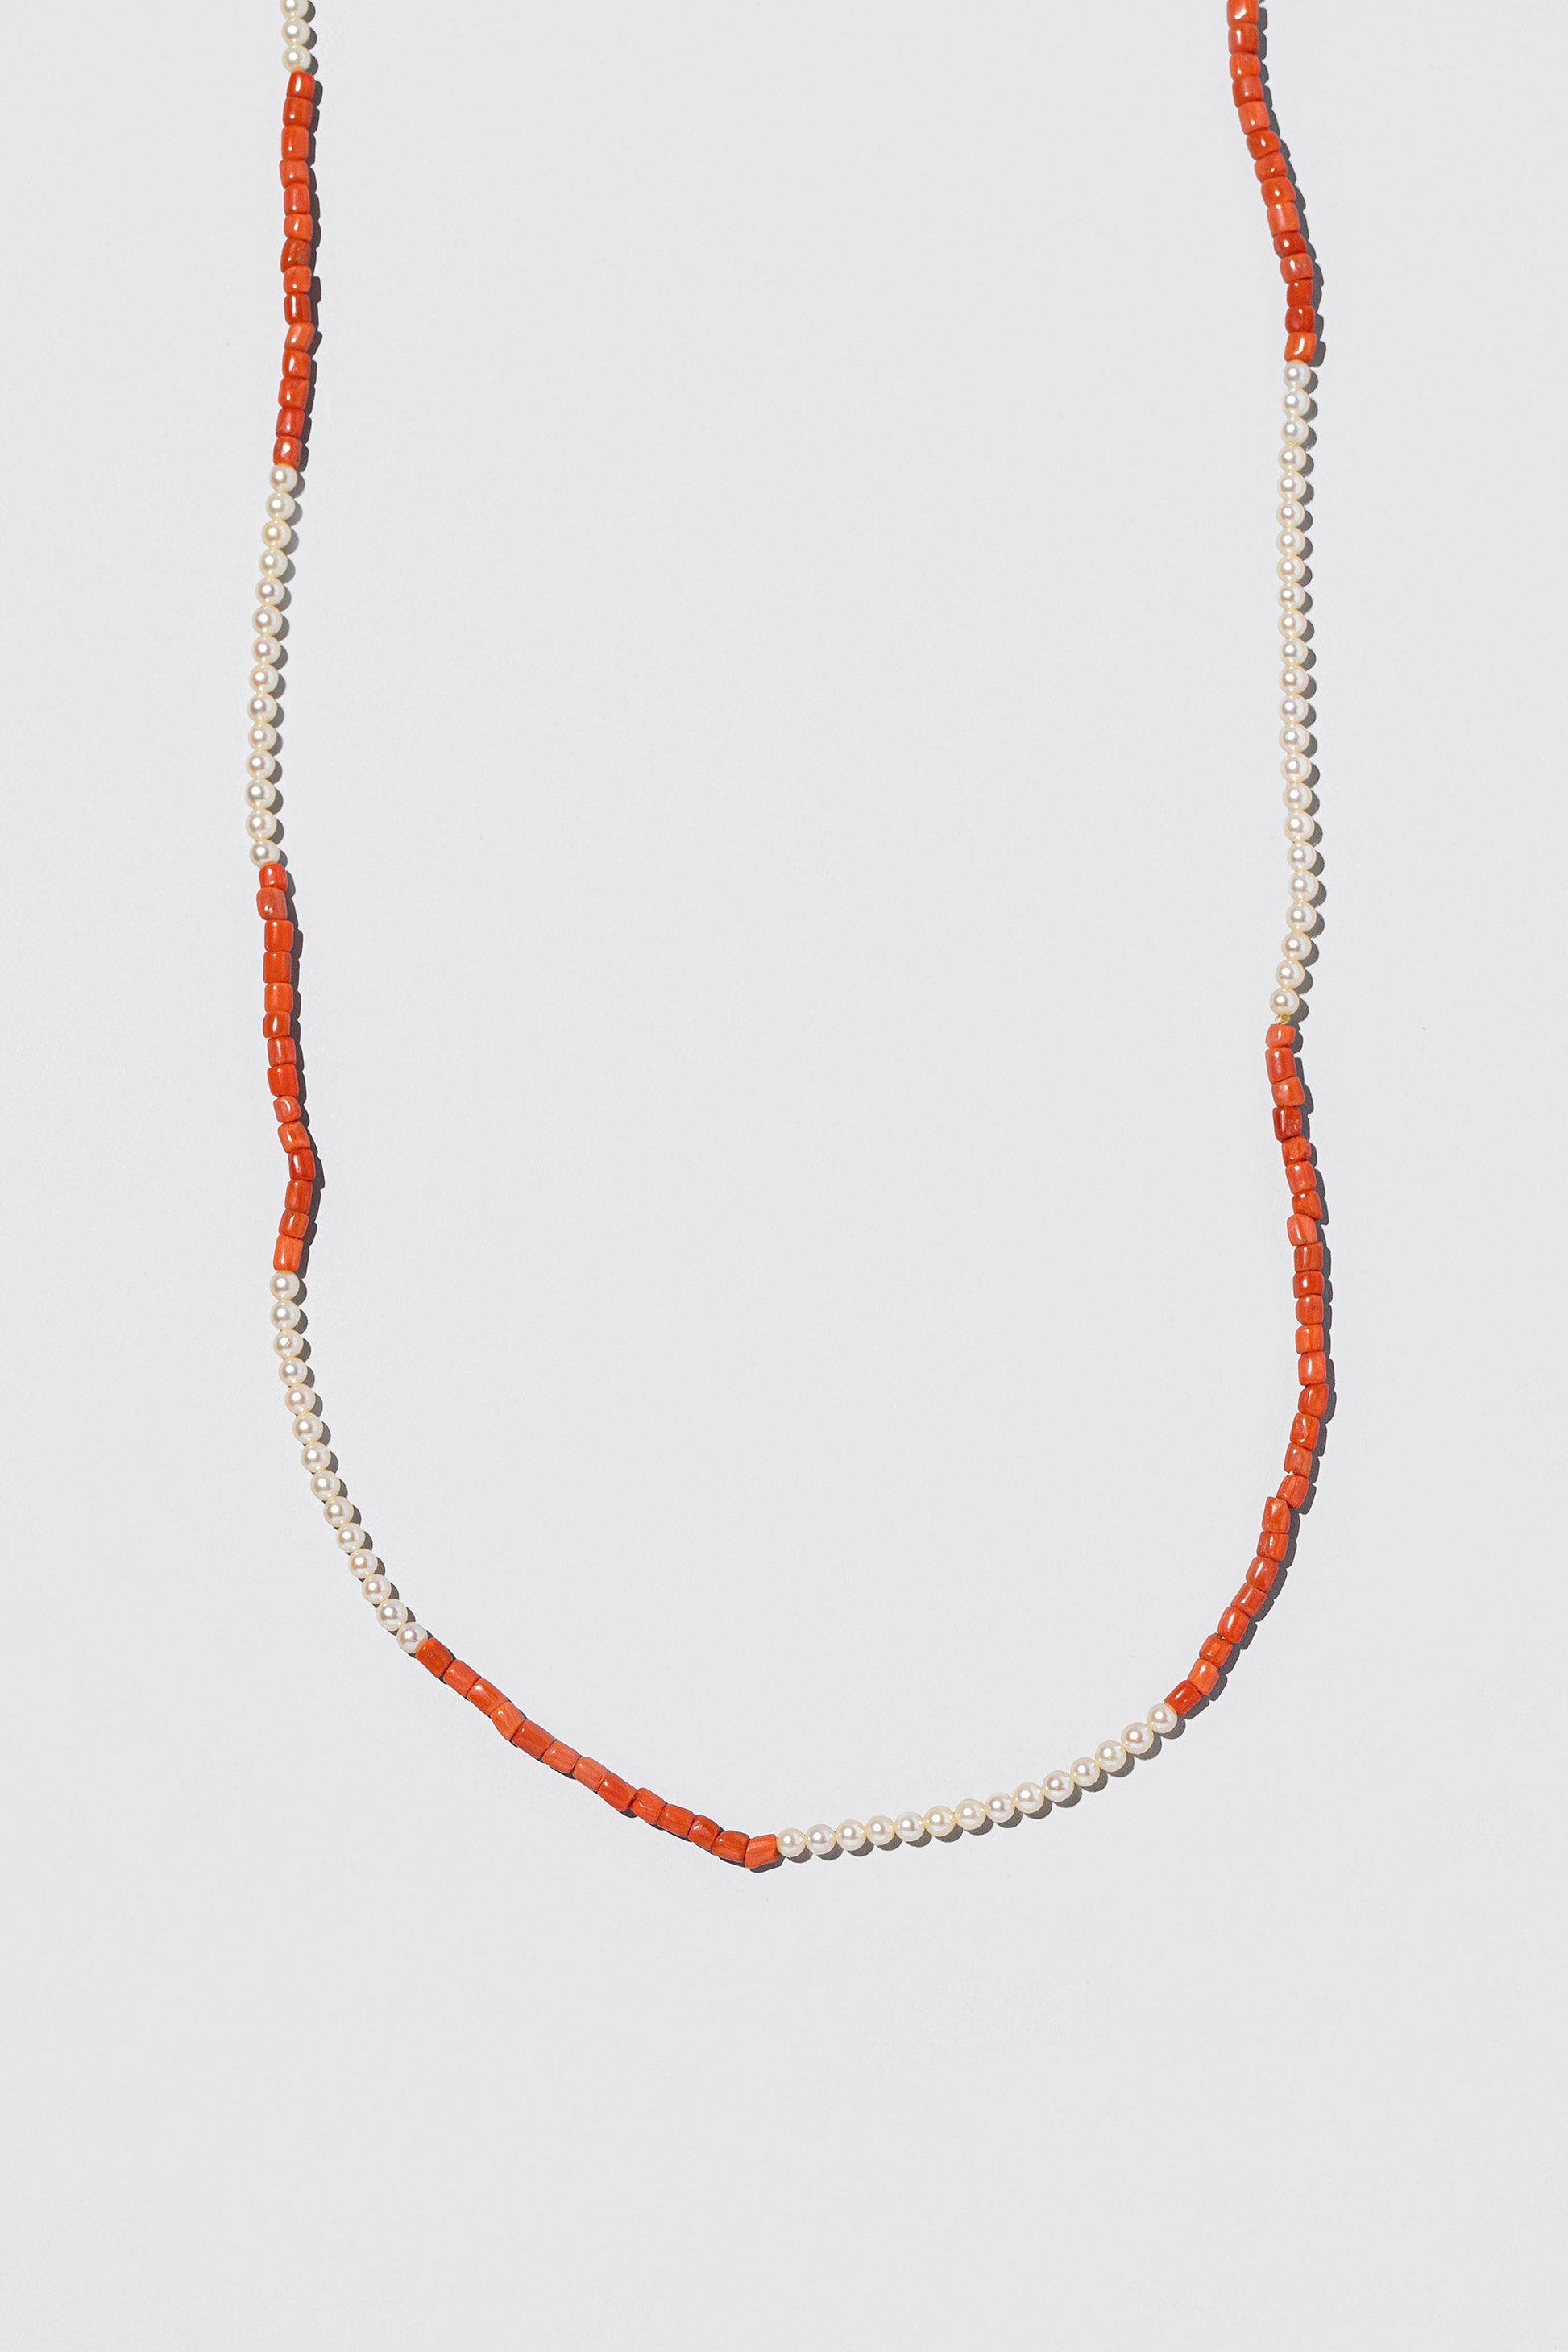  Coral Necklace on light color background.